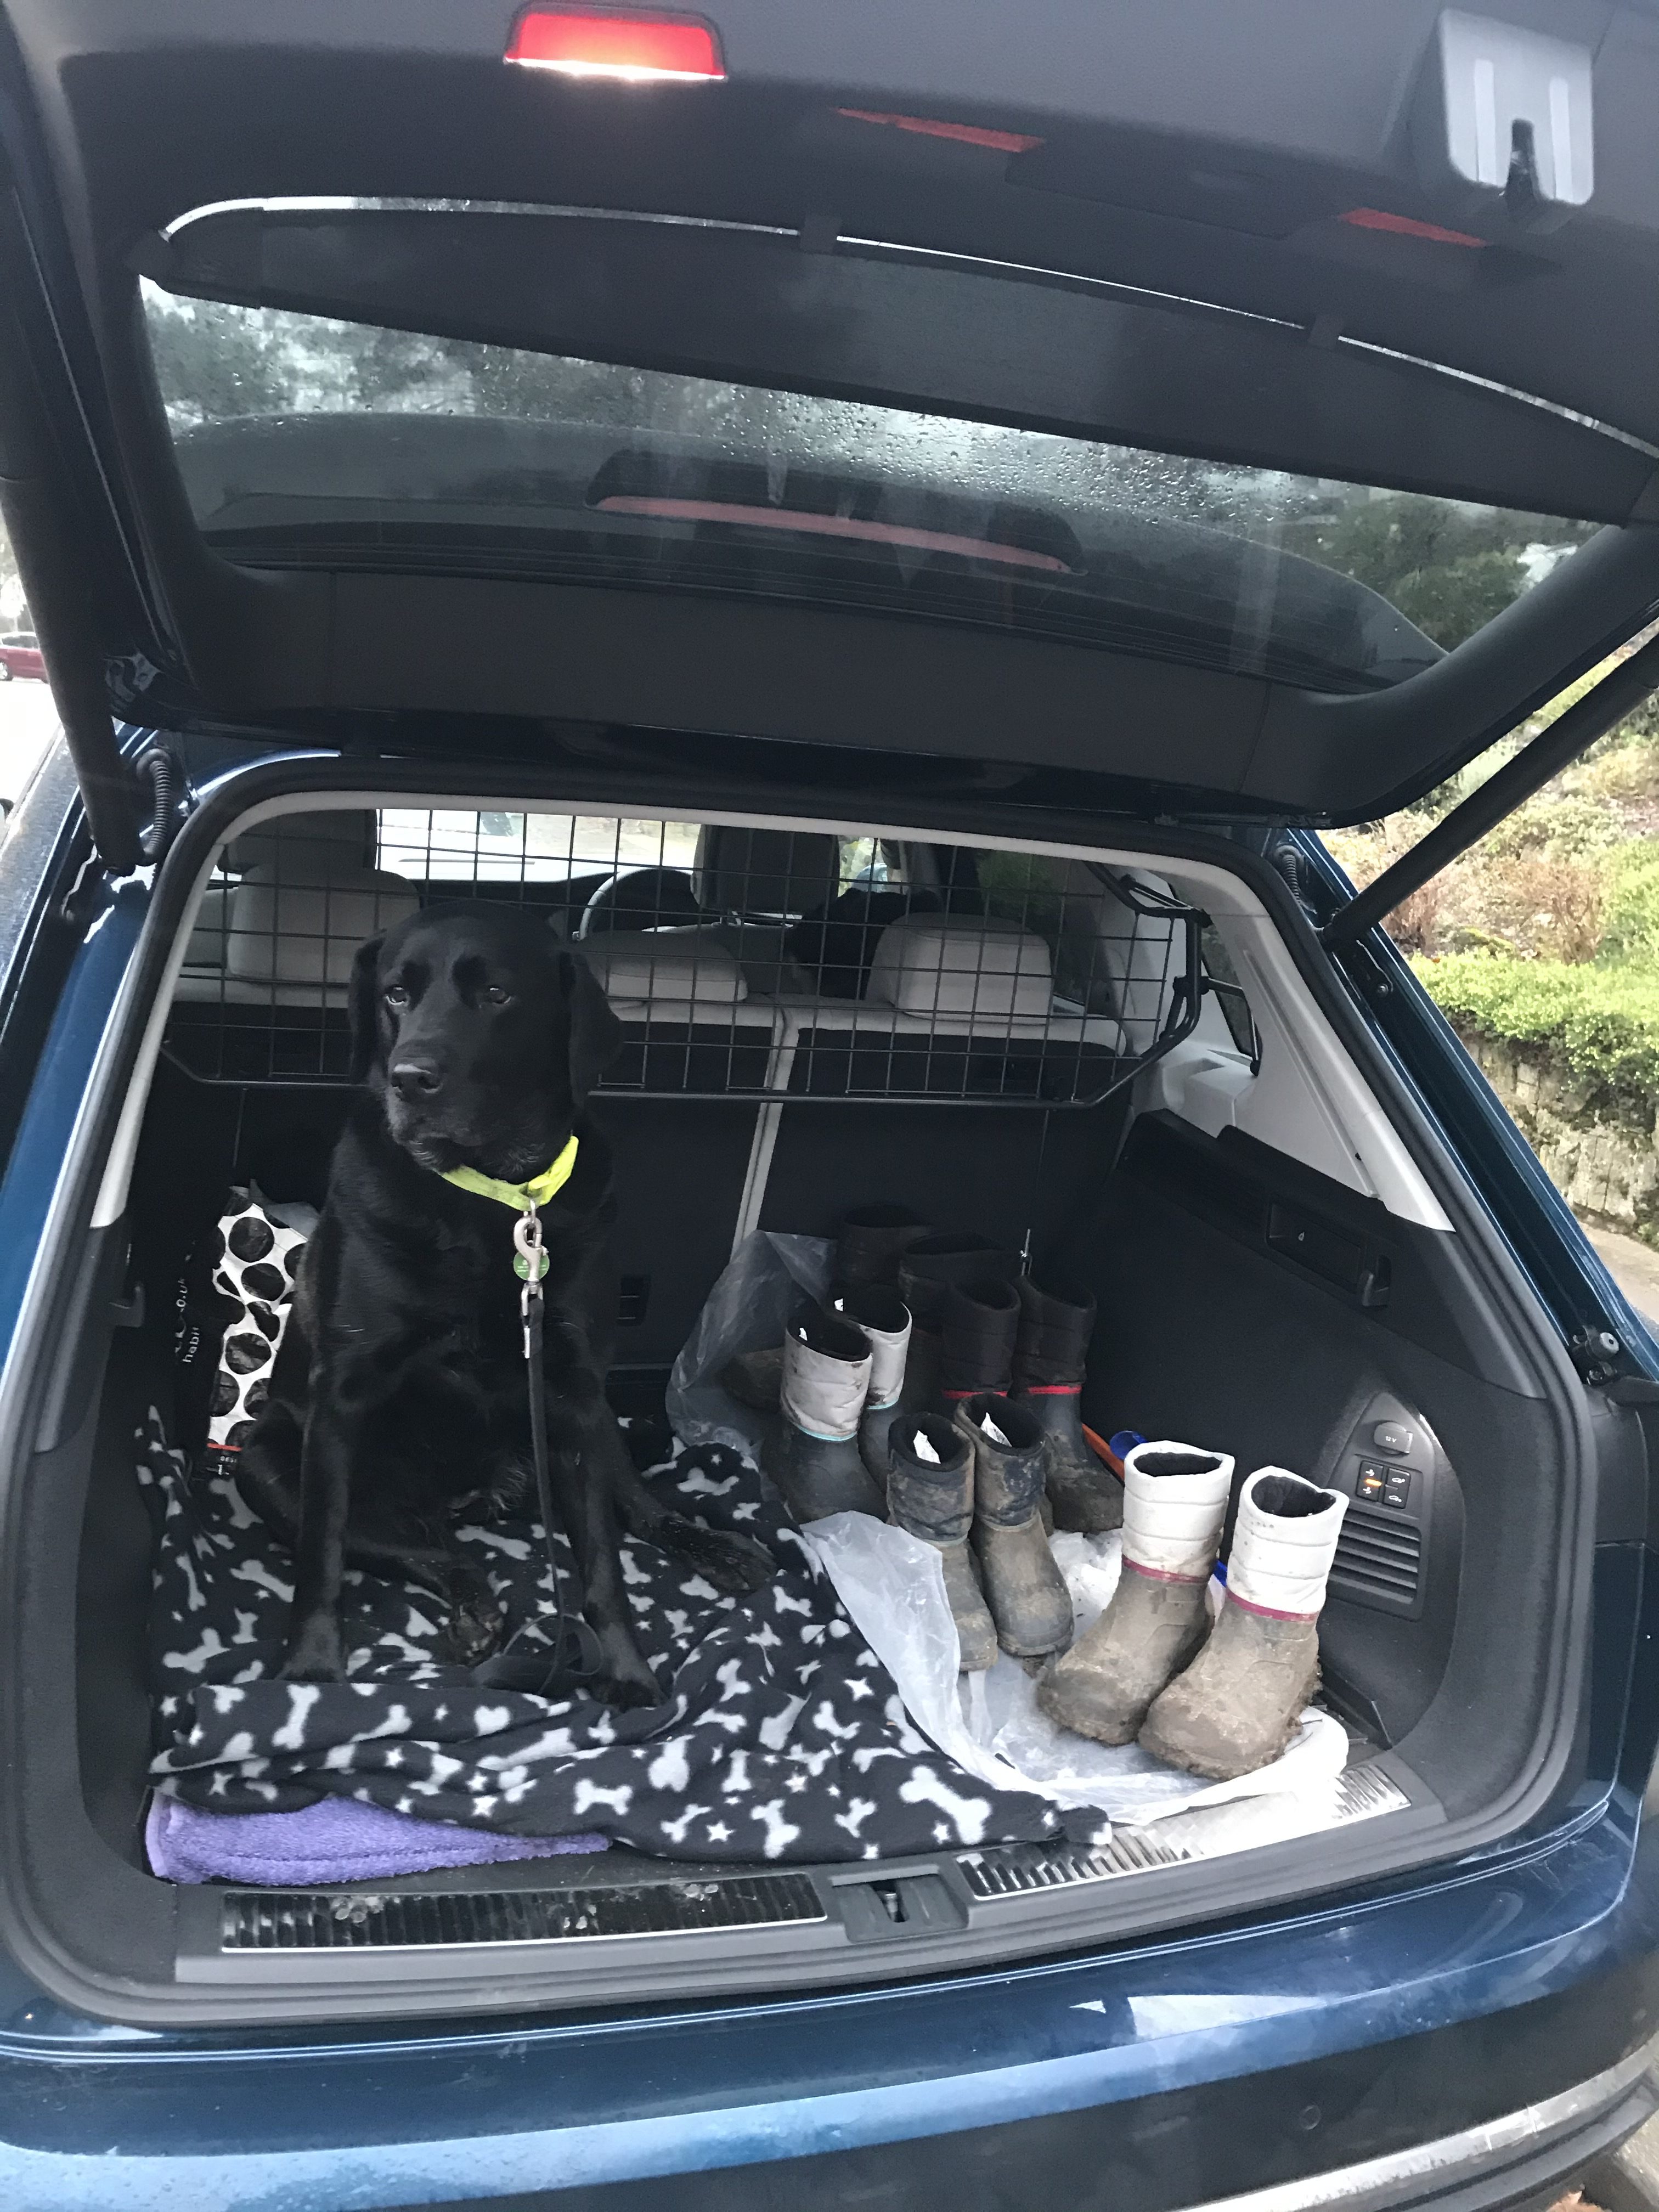 Best cars for dogs 2021 - VW Touareg